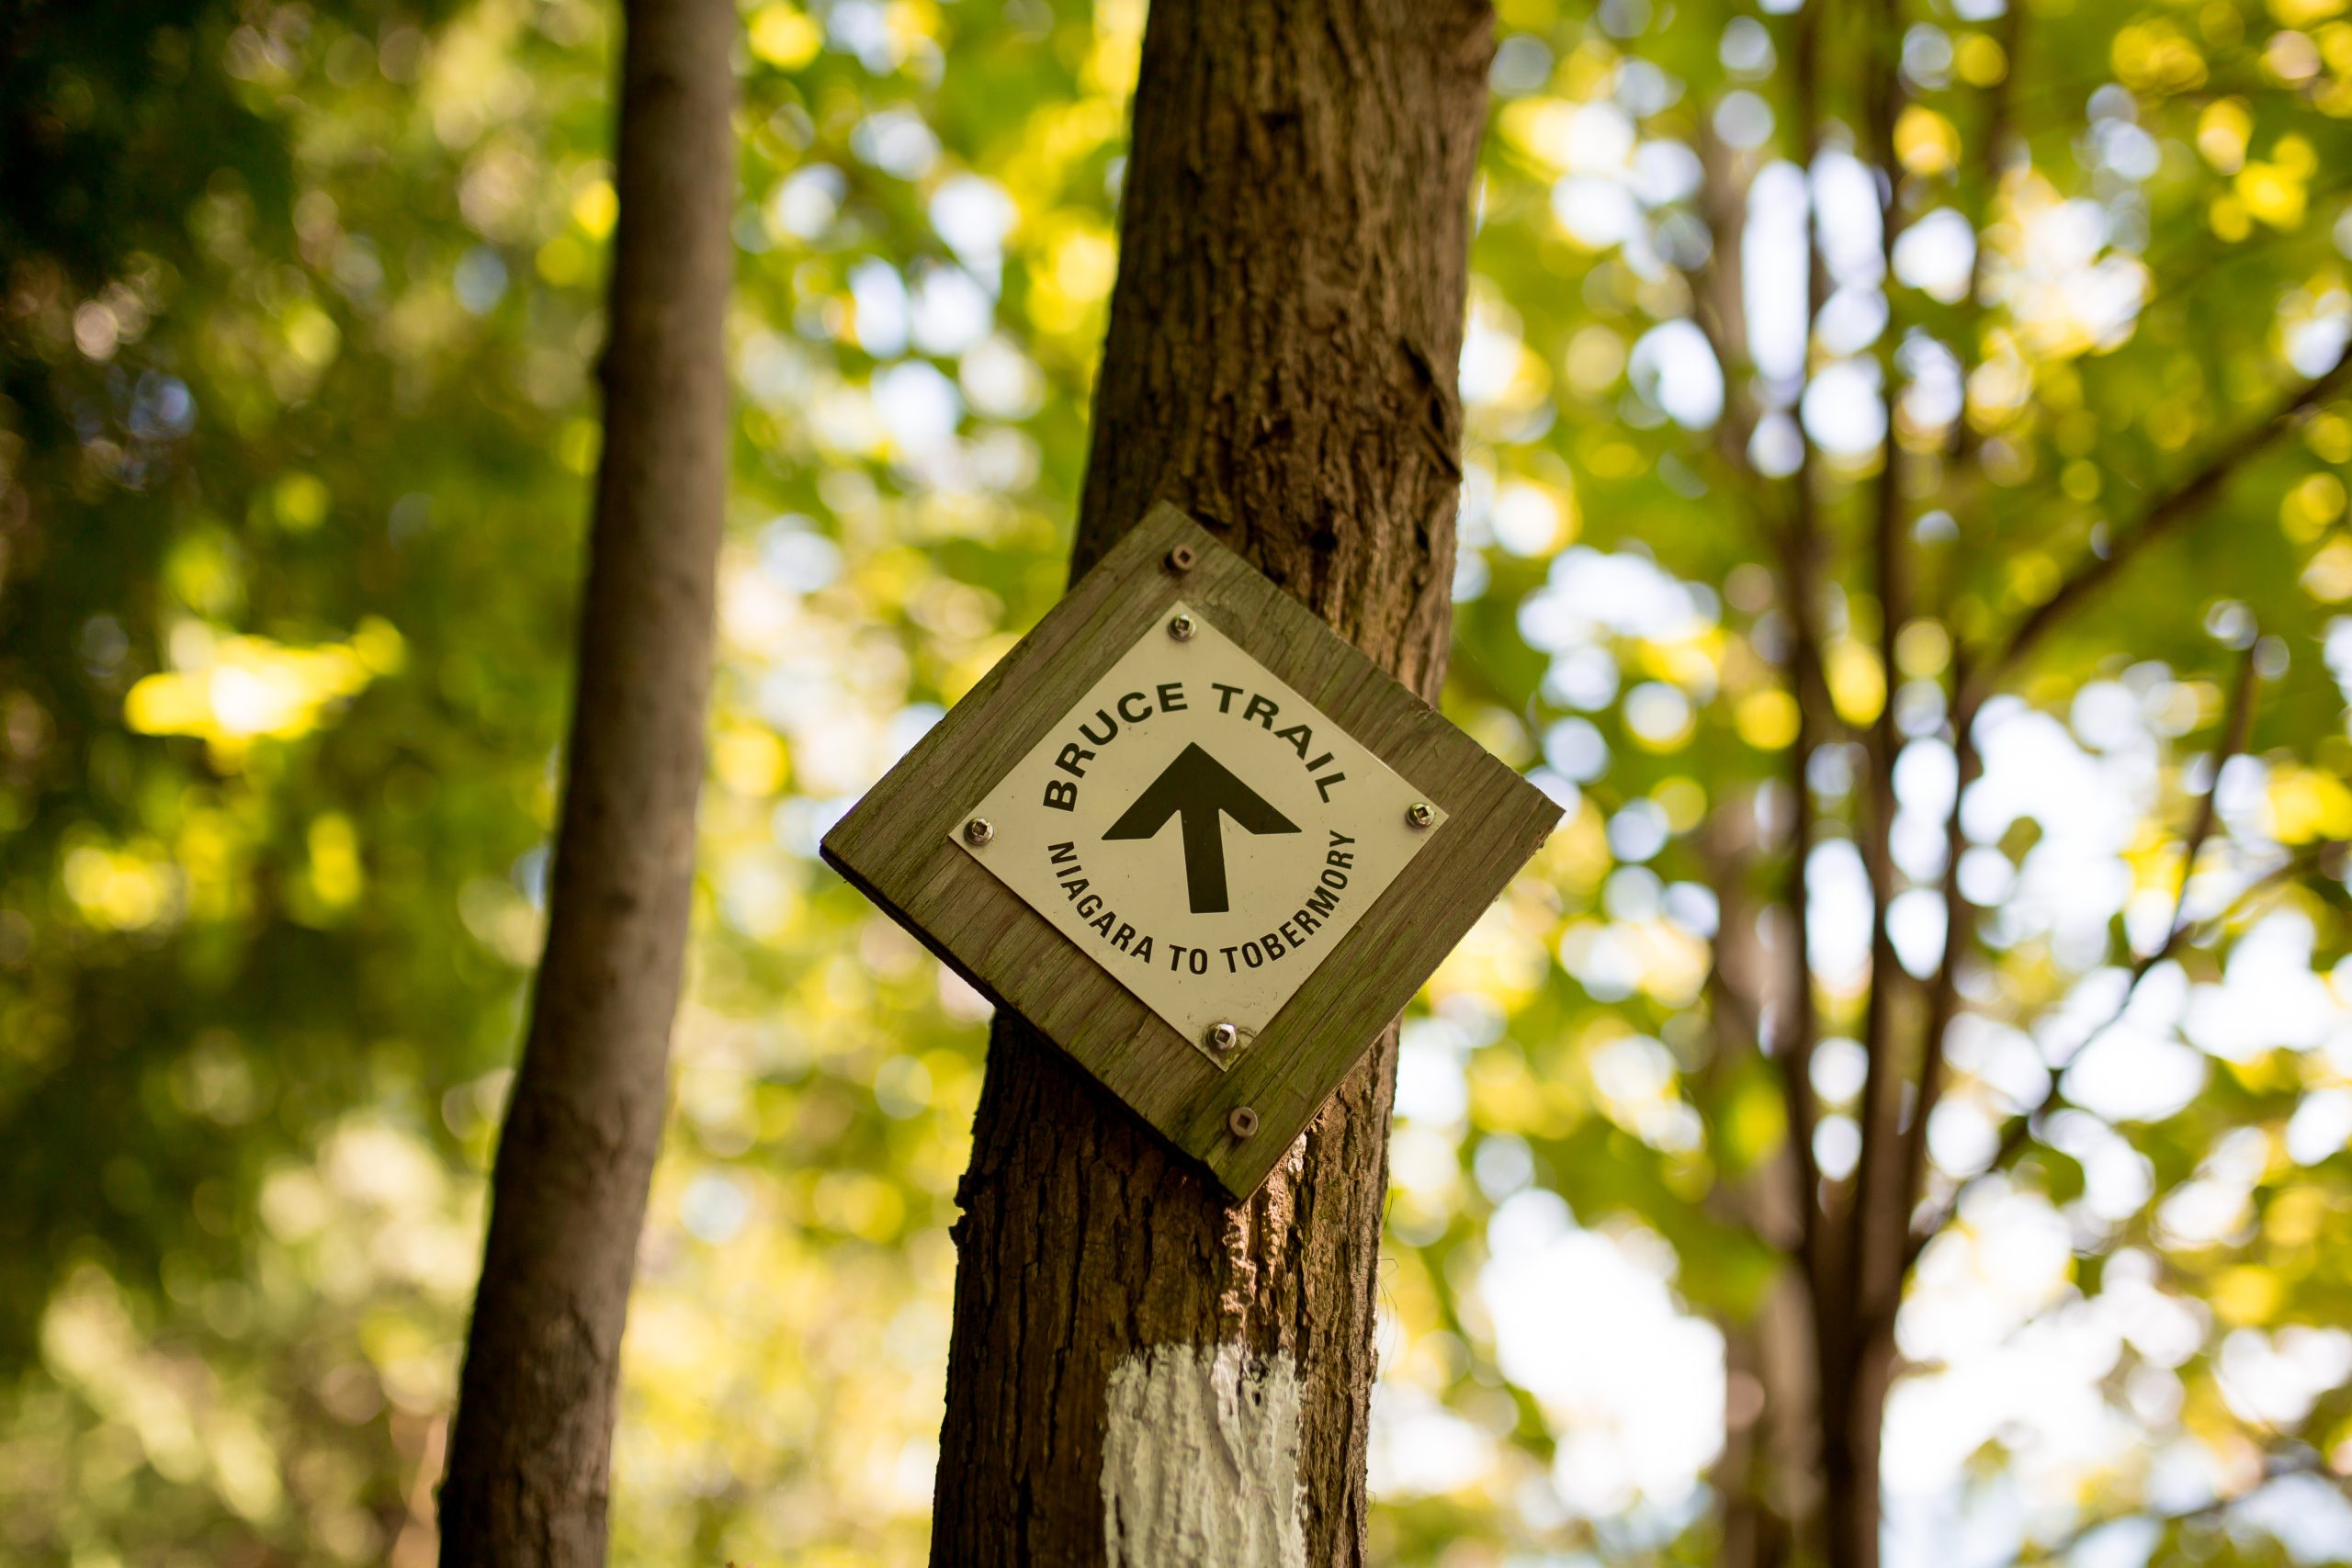 Bruce Trail sign in forest